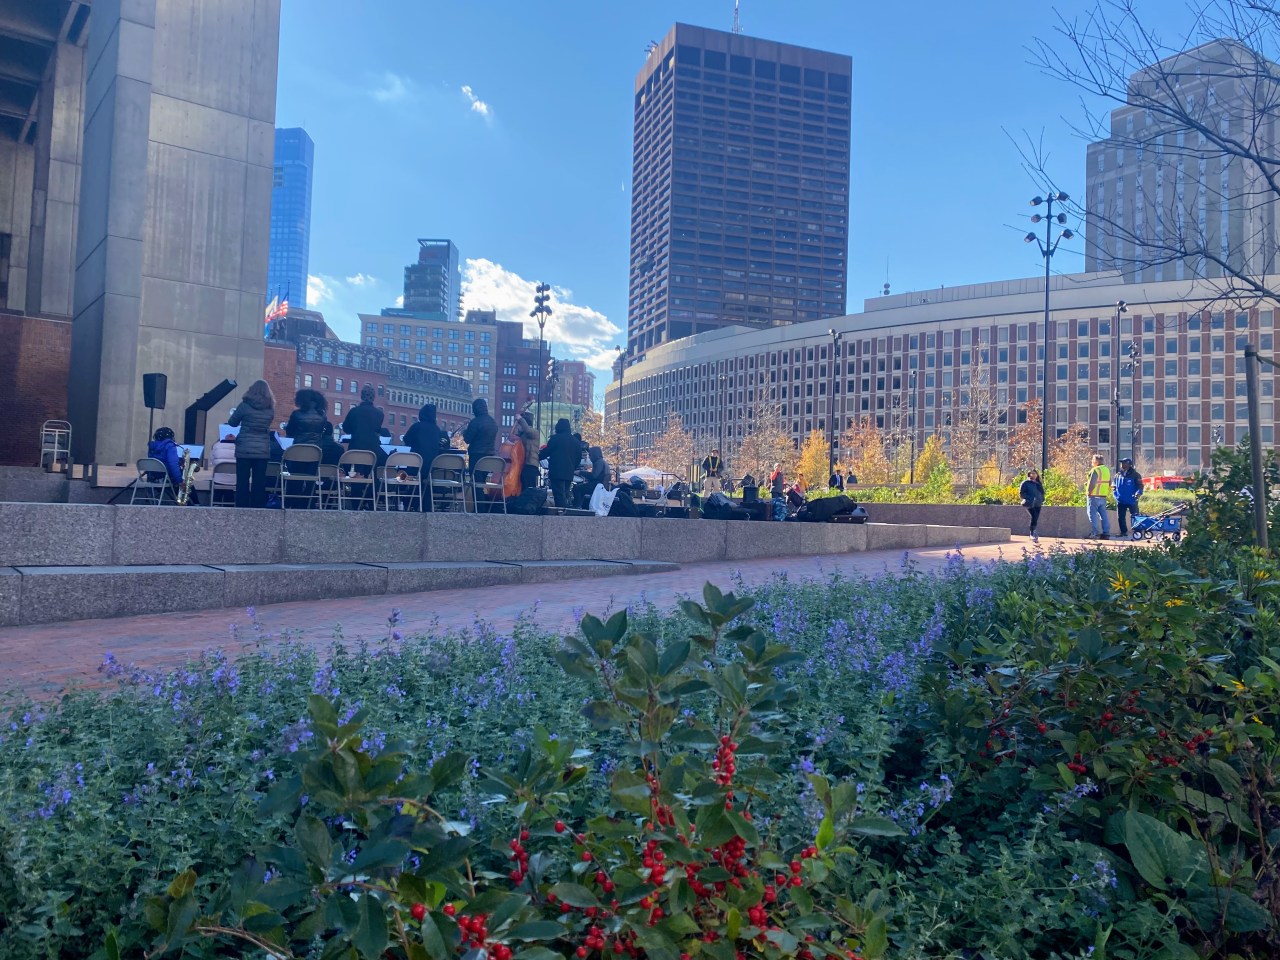 a student band plays behind blue and red flowers sitting among a bed of greenery on a portion of the plaza under a blue sky.